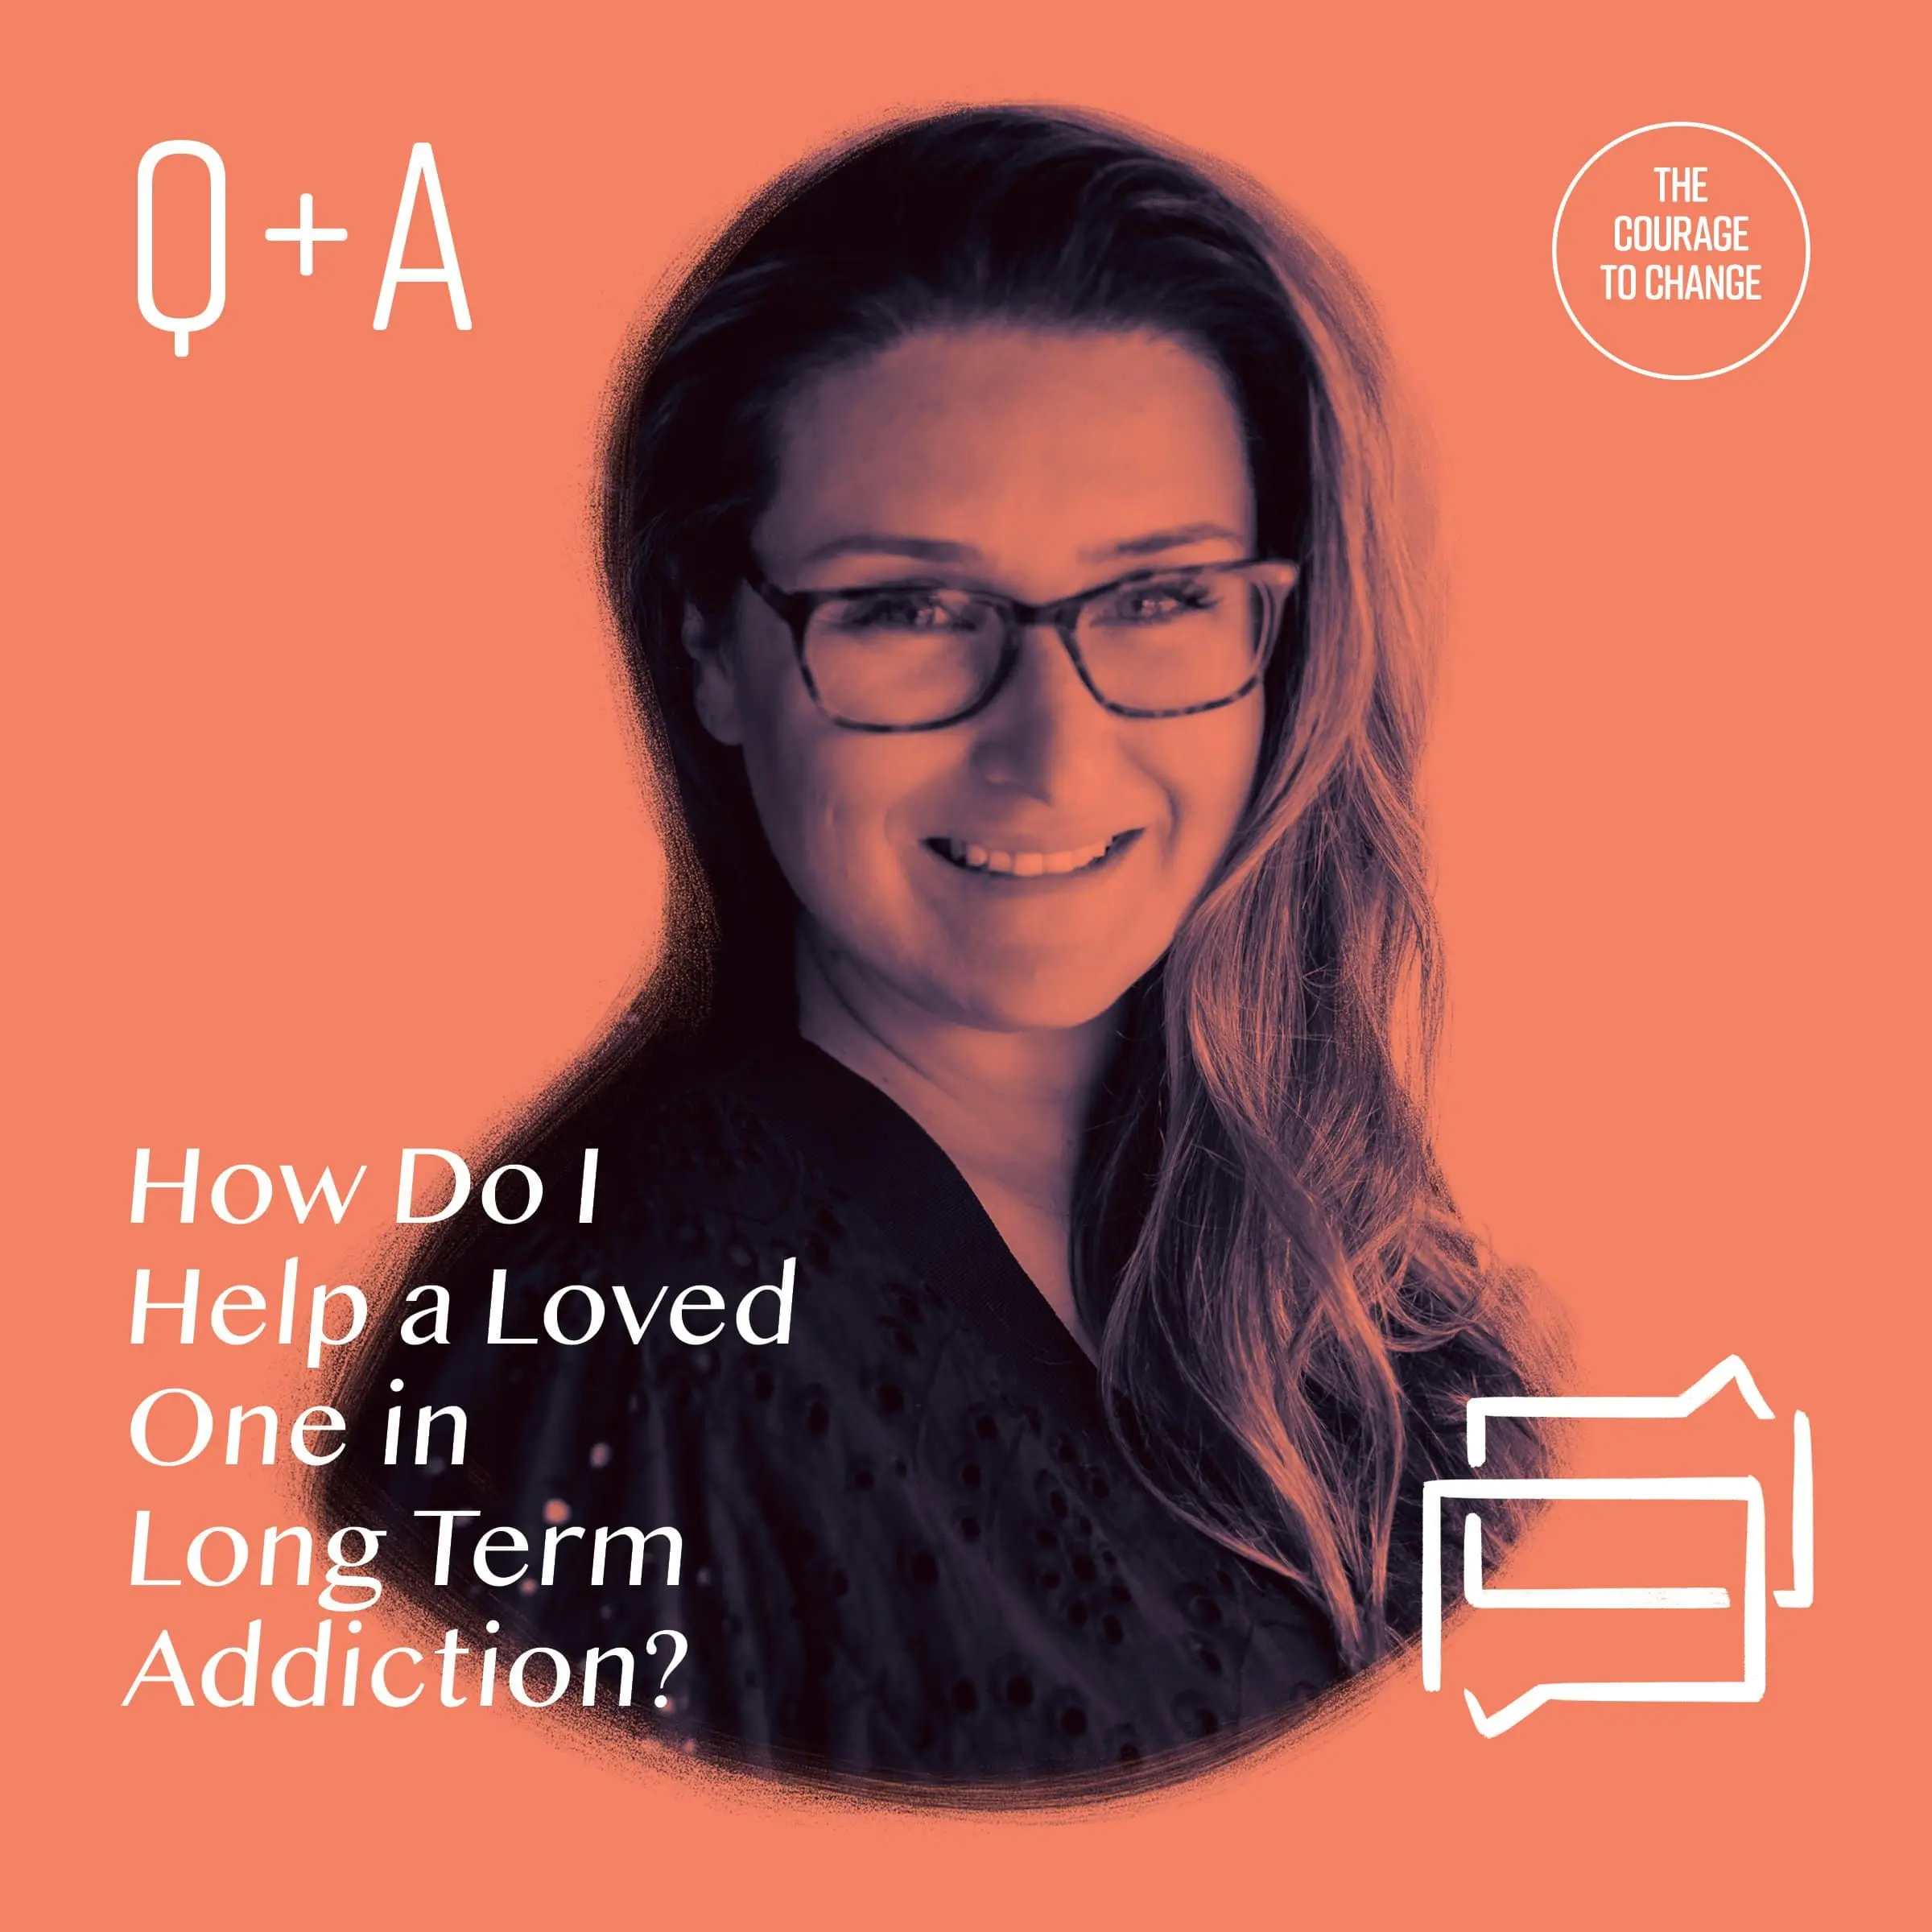 Q+A How Do I Help a Loved One in Long Term Addiction?